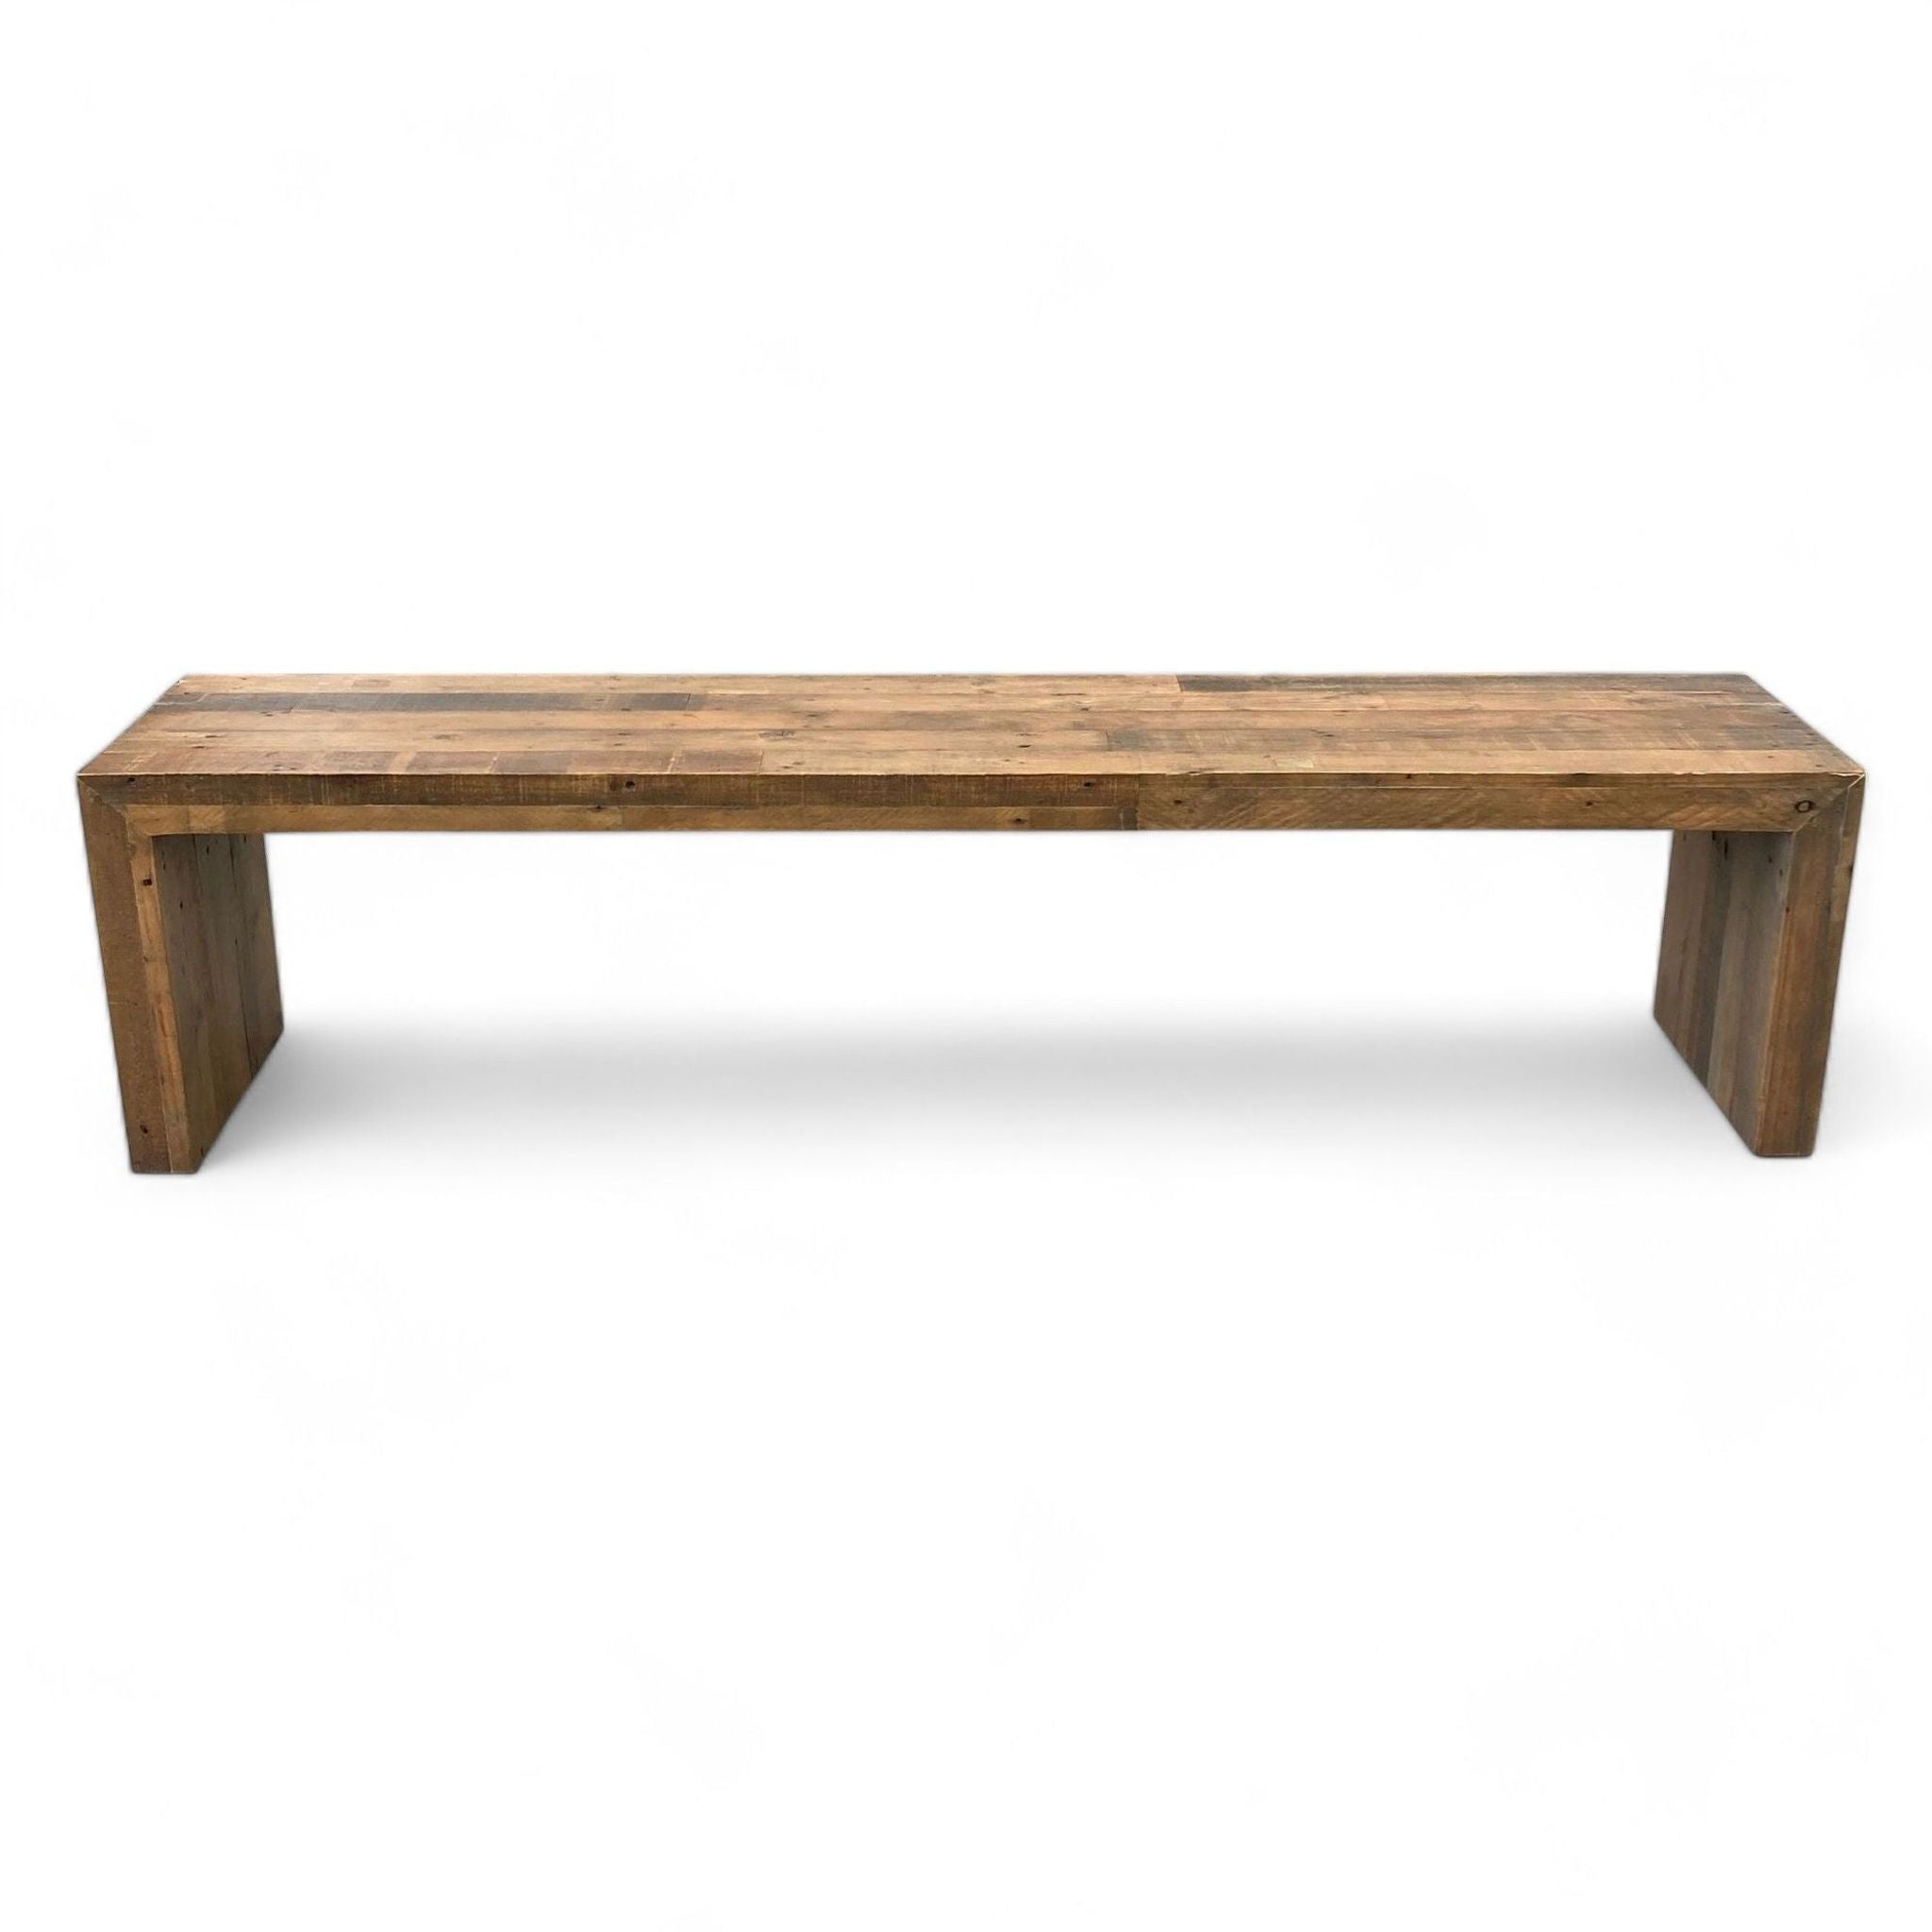 1. Long rustic wooden bench by Reperch with simple line design and visible wood grain, against a white background.